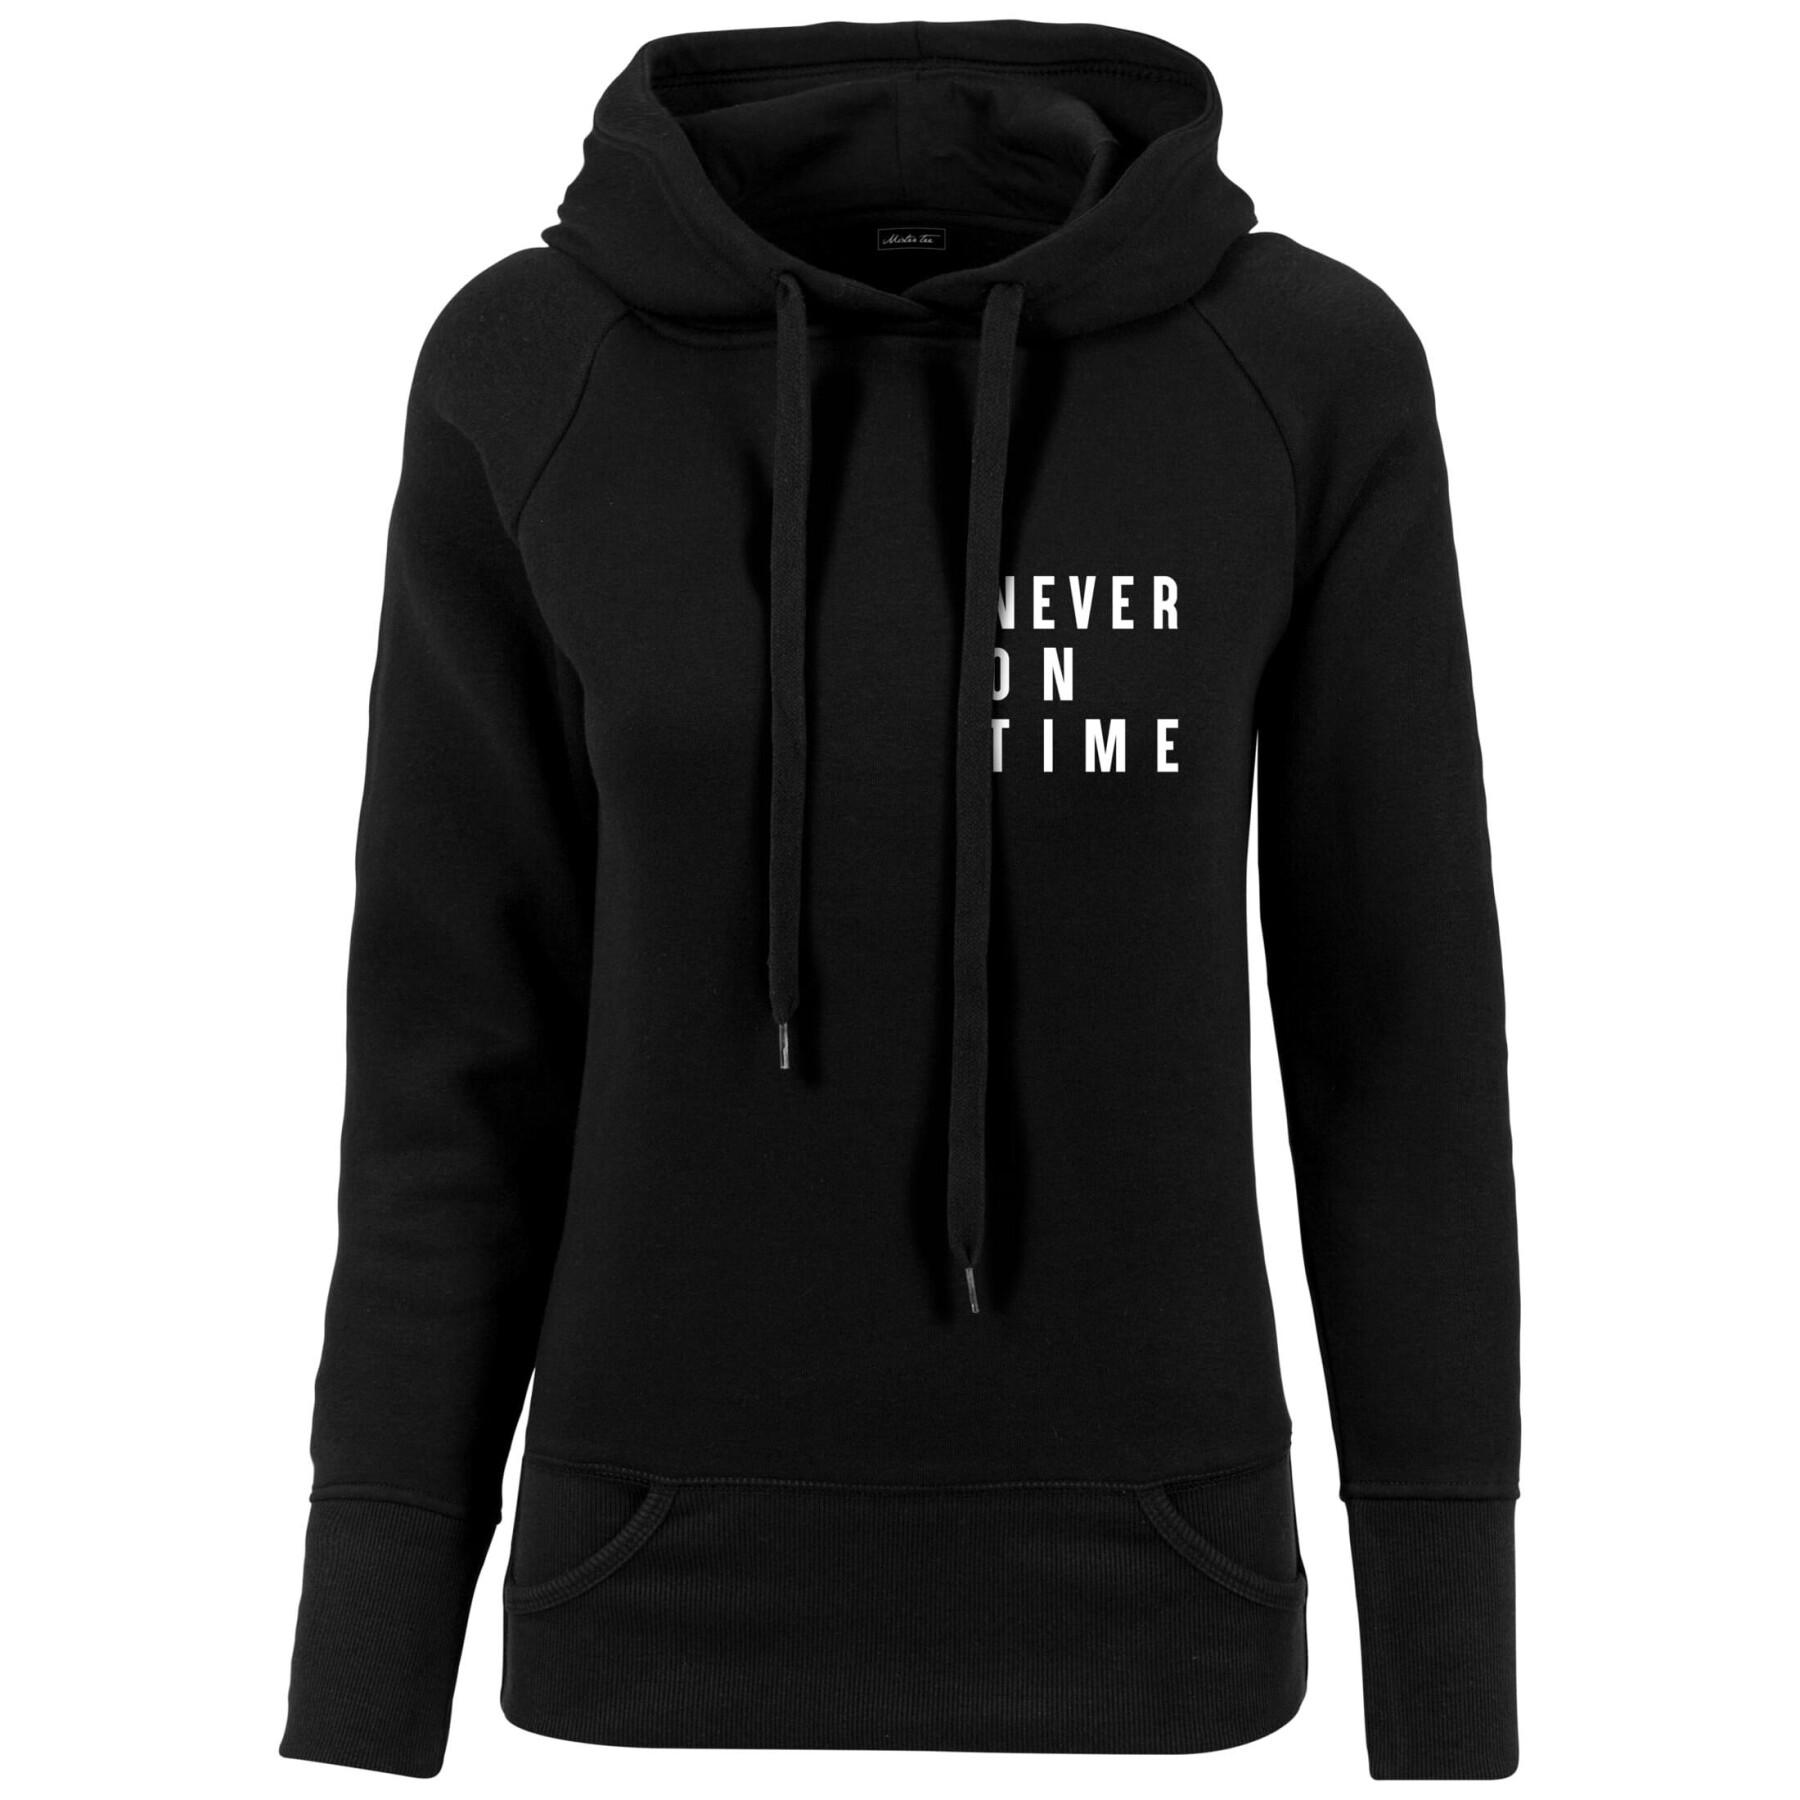 Sweat sudadera con capucha para mujer Mister Tee Never On Time